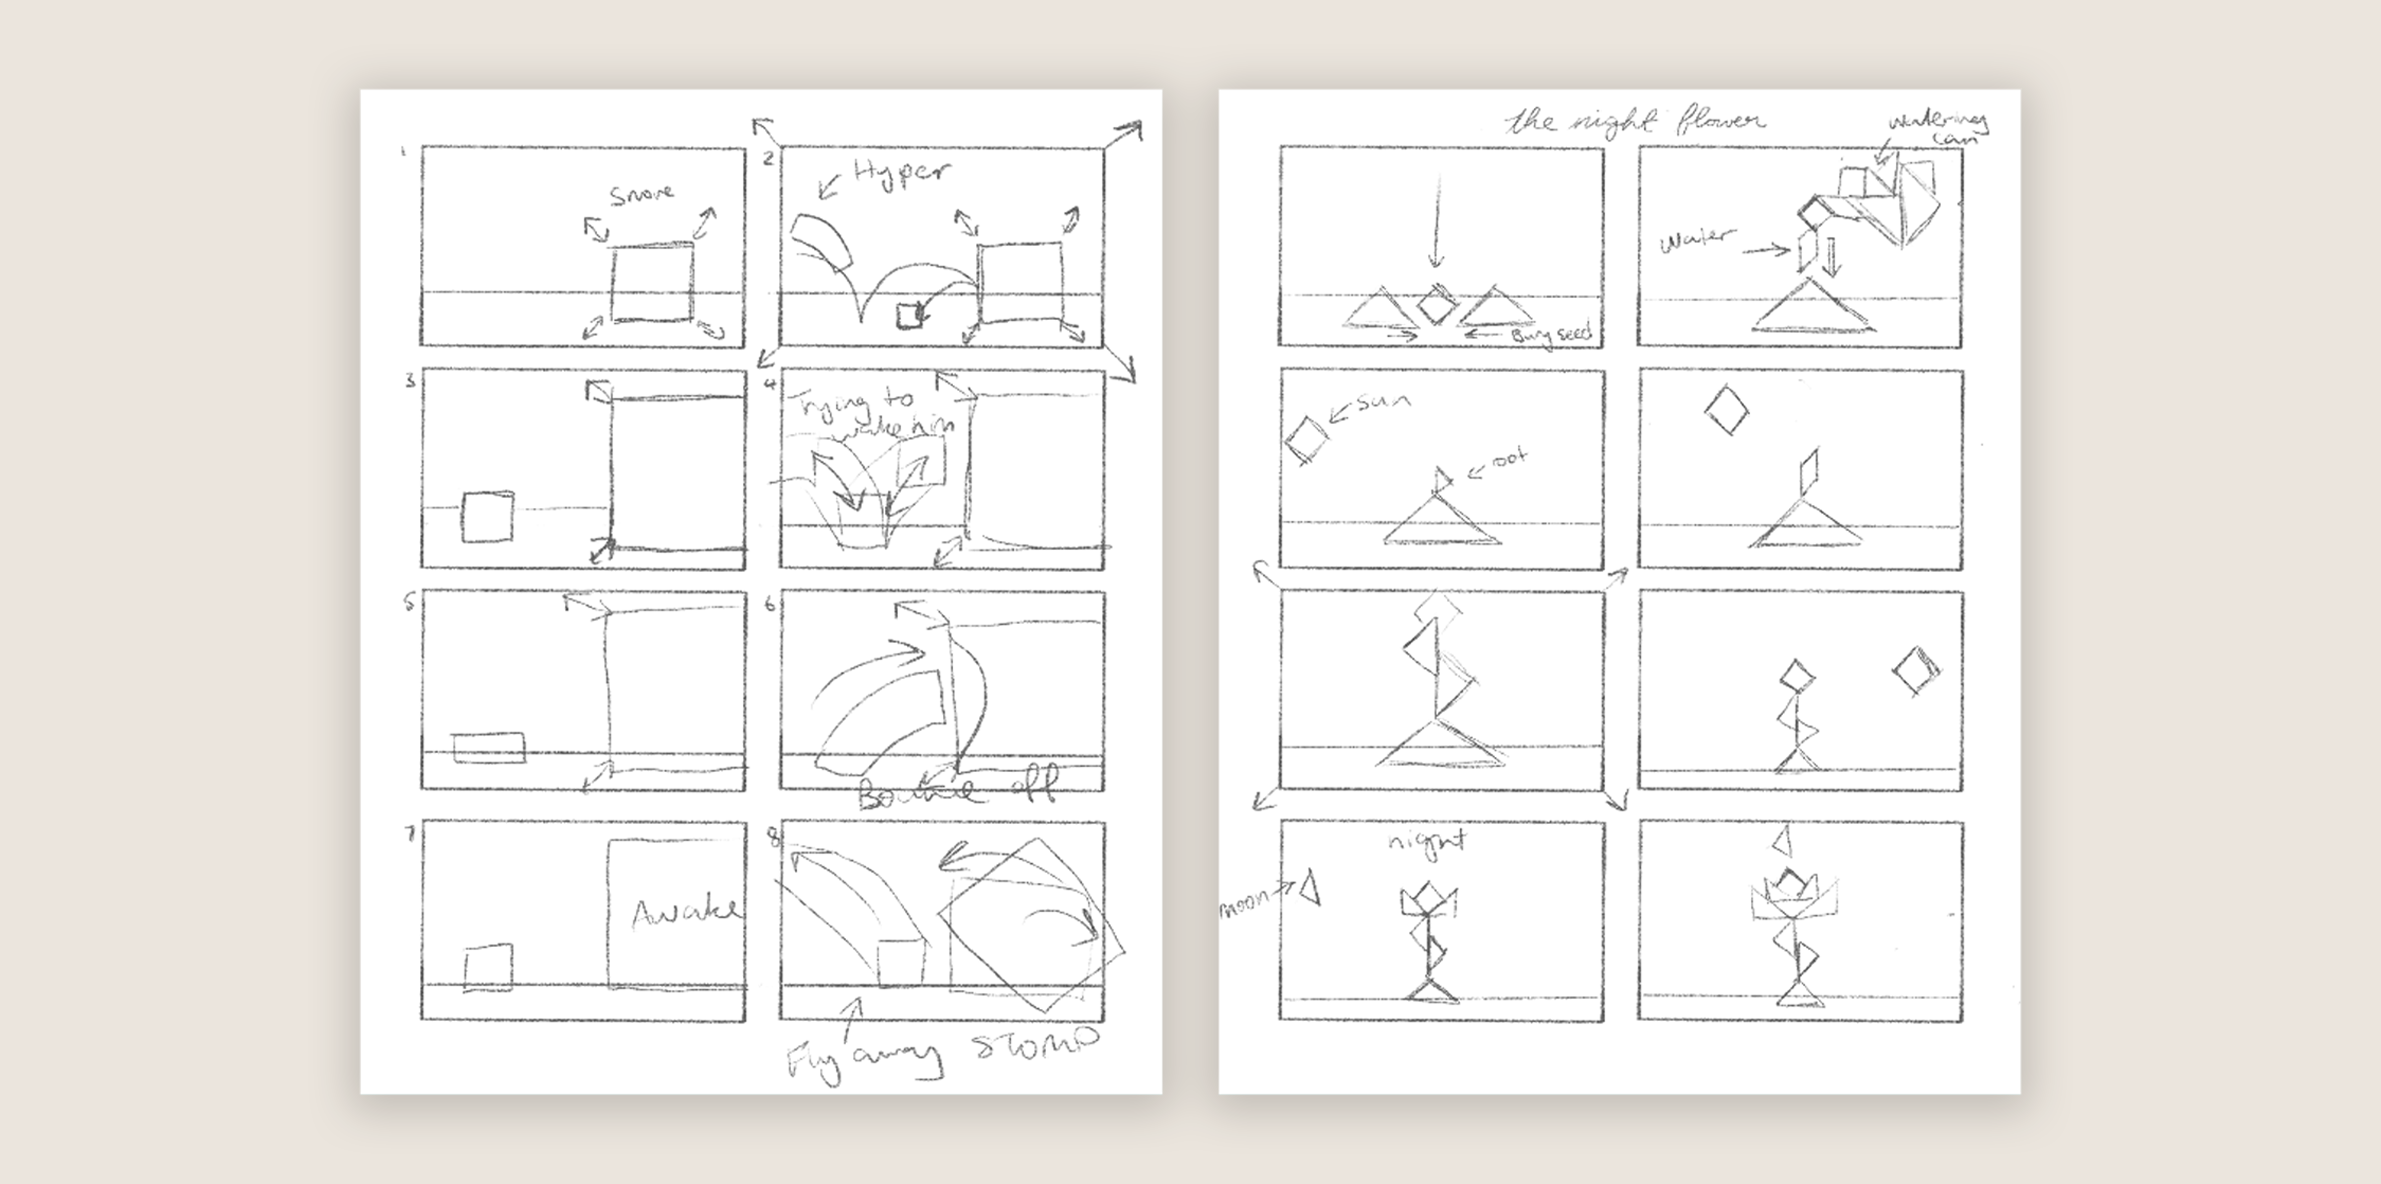 Screenshots of storyboards for the squares animation and tangram flower exercise.